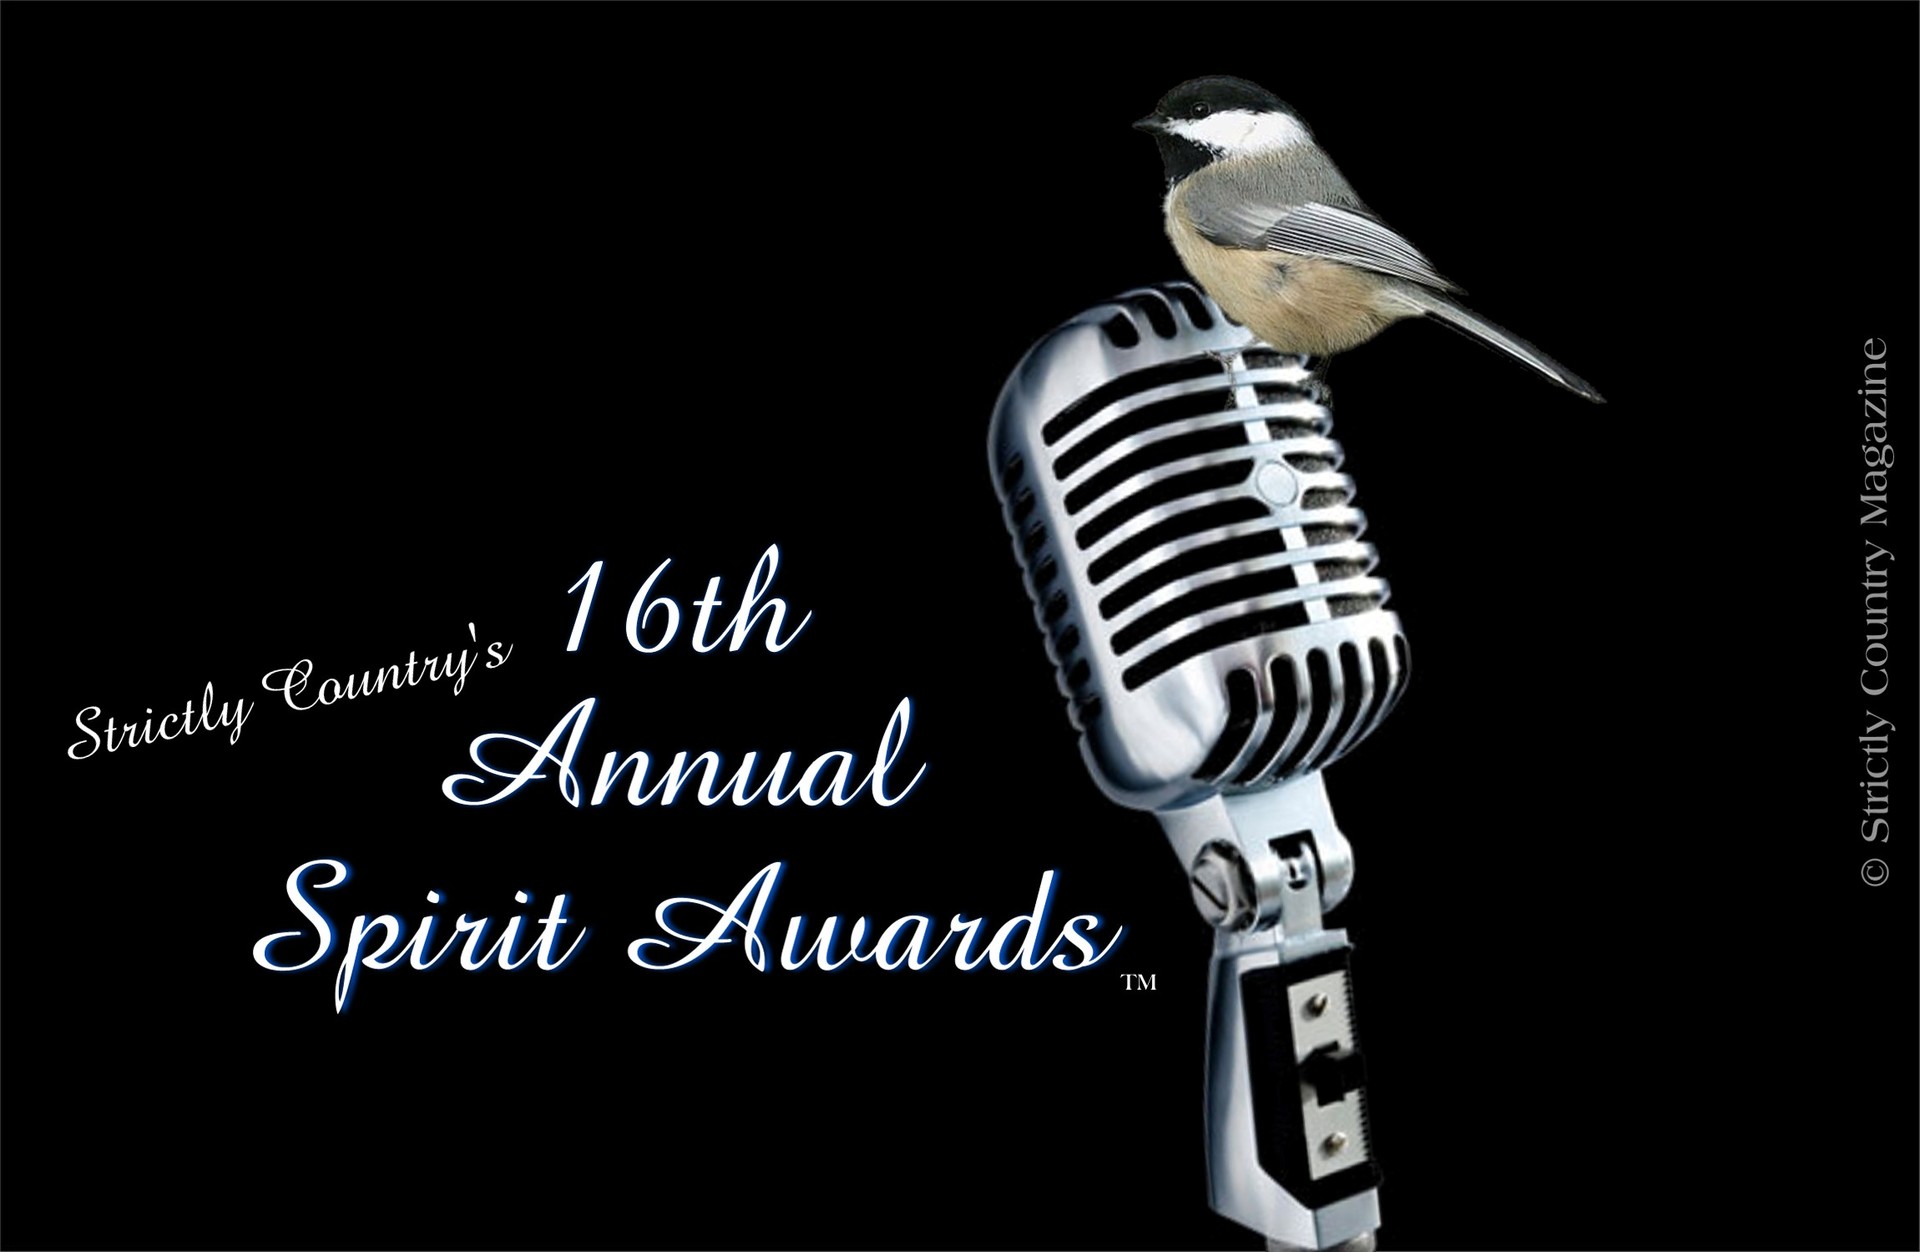 Strictly Country Magazine copyright 16th Annual Spirit Awards official logo